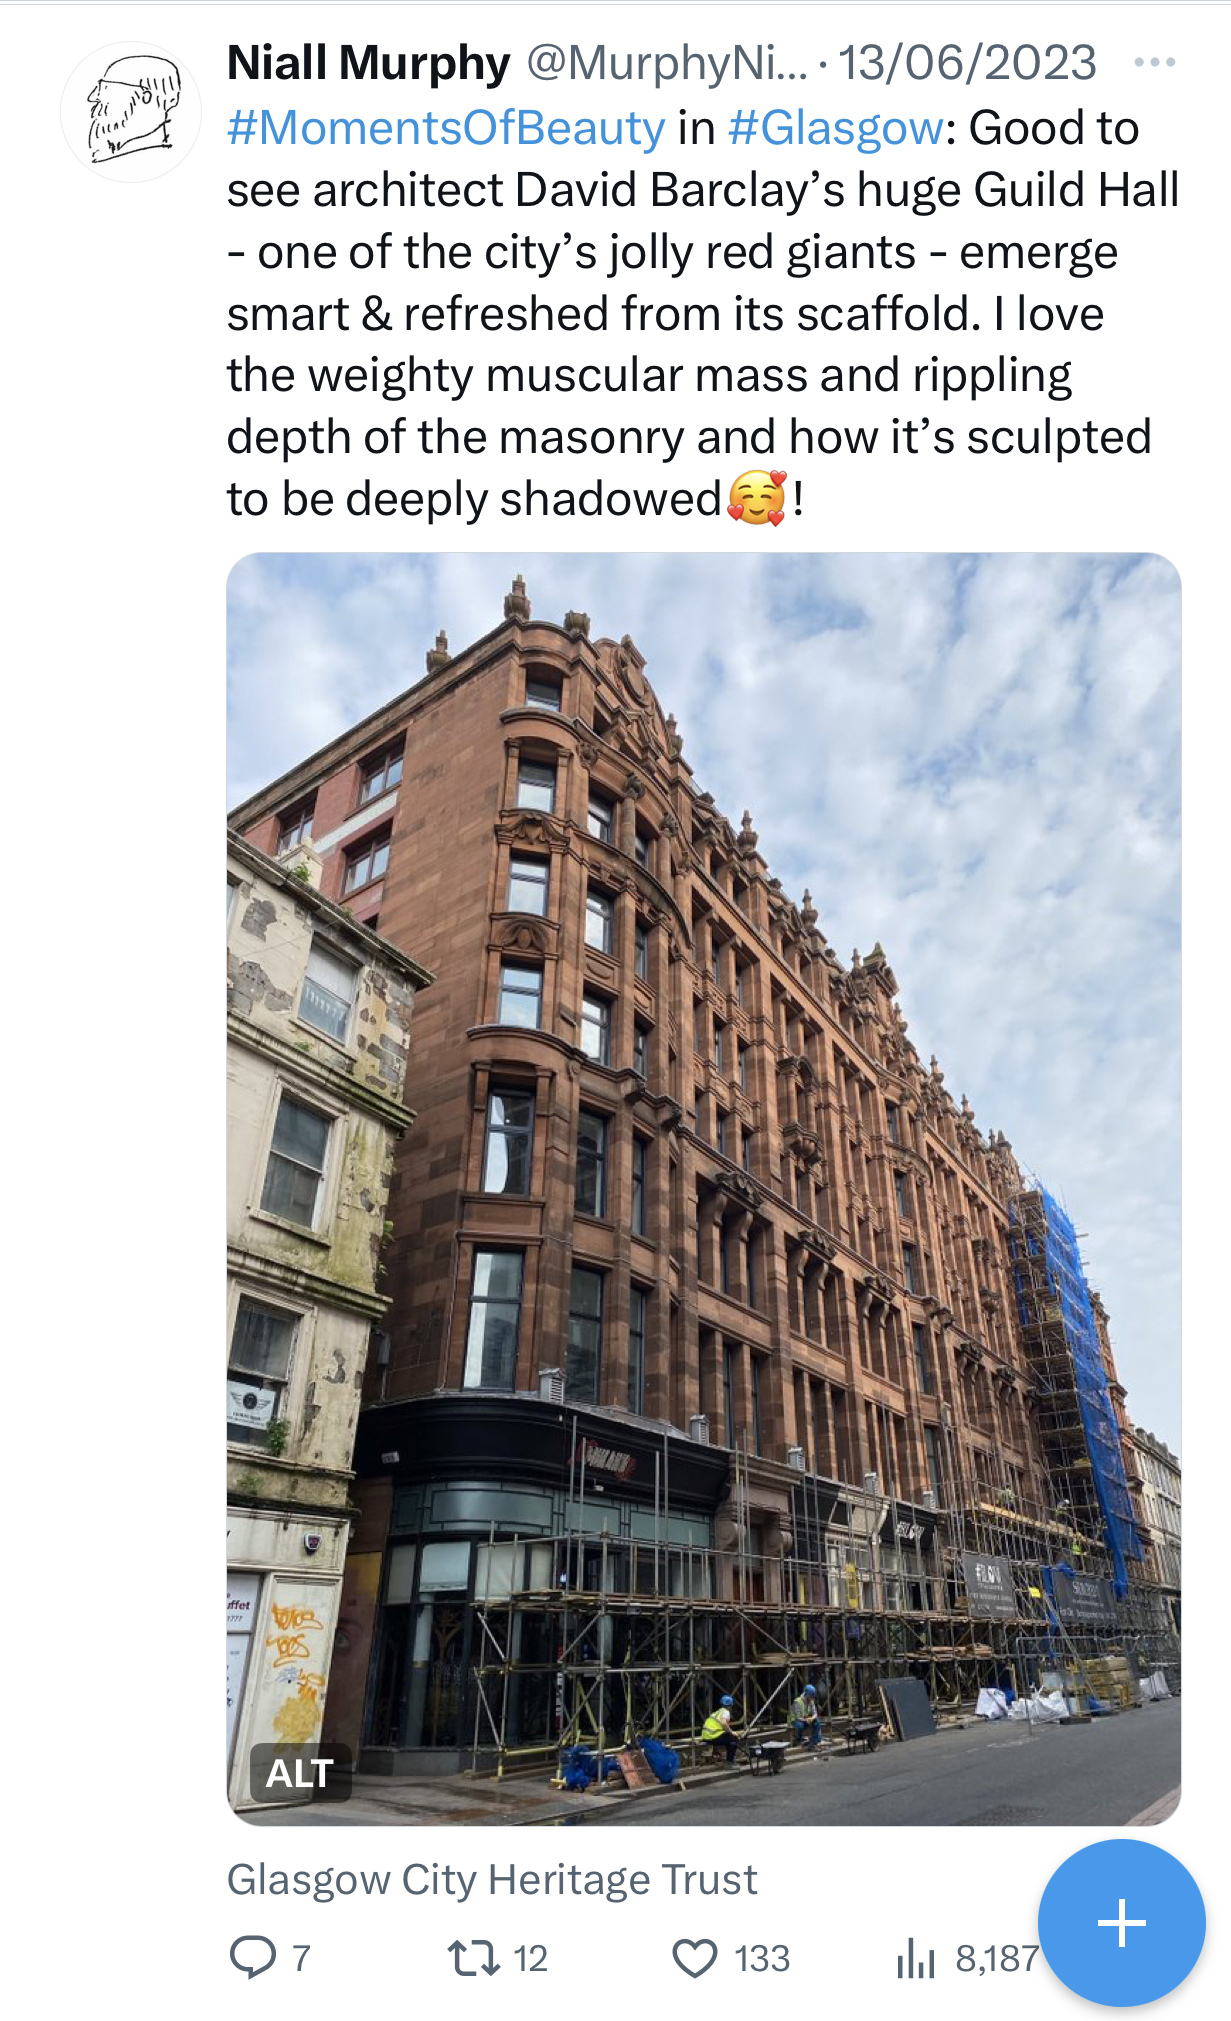 A tweet by Niall Murphy. It features a photograph of a red sandstone tenement with shops on the bottom. The writing says: #MomentsOfBeauty in #Glasgow: Good to see architect David Barclay's huge Guild Hall - one of the city's jolly red giants - emerge smart and refreshed from its scaffold. I love the weighty muscular mass and rippling depth of the masonry and how it's sculpted to be deeply shadowed.'